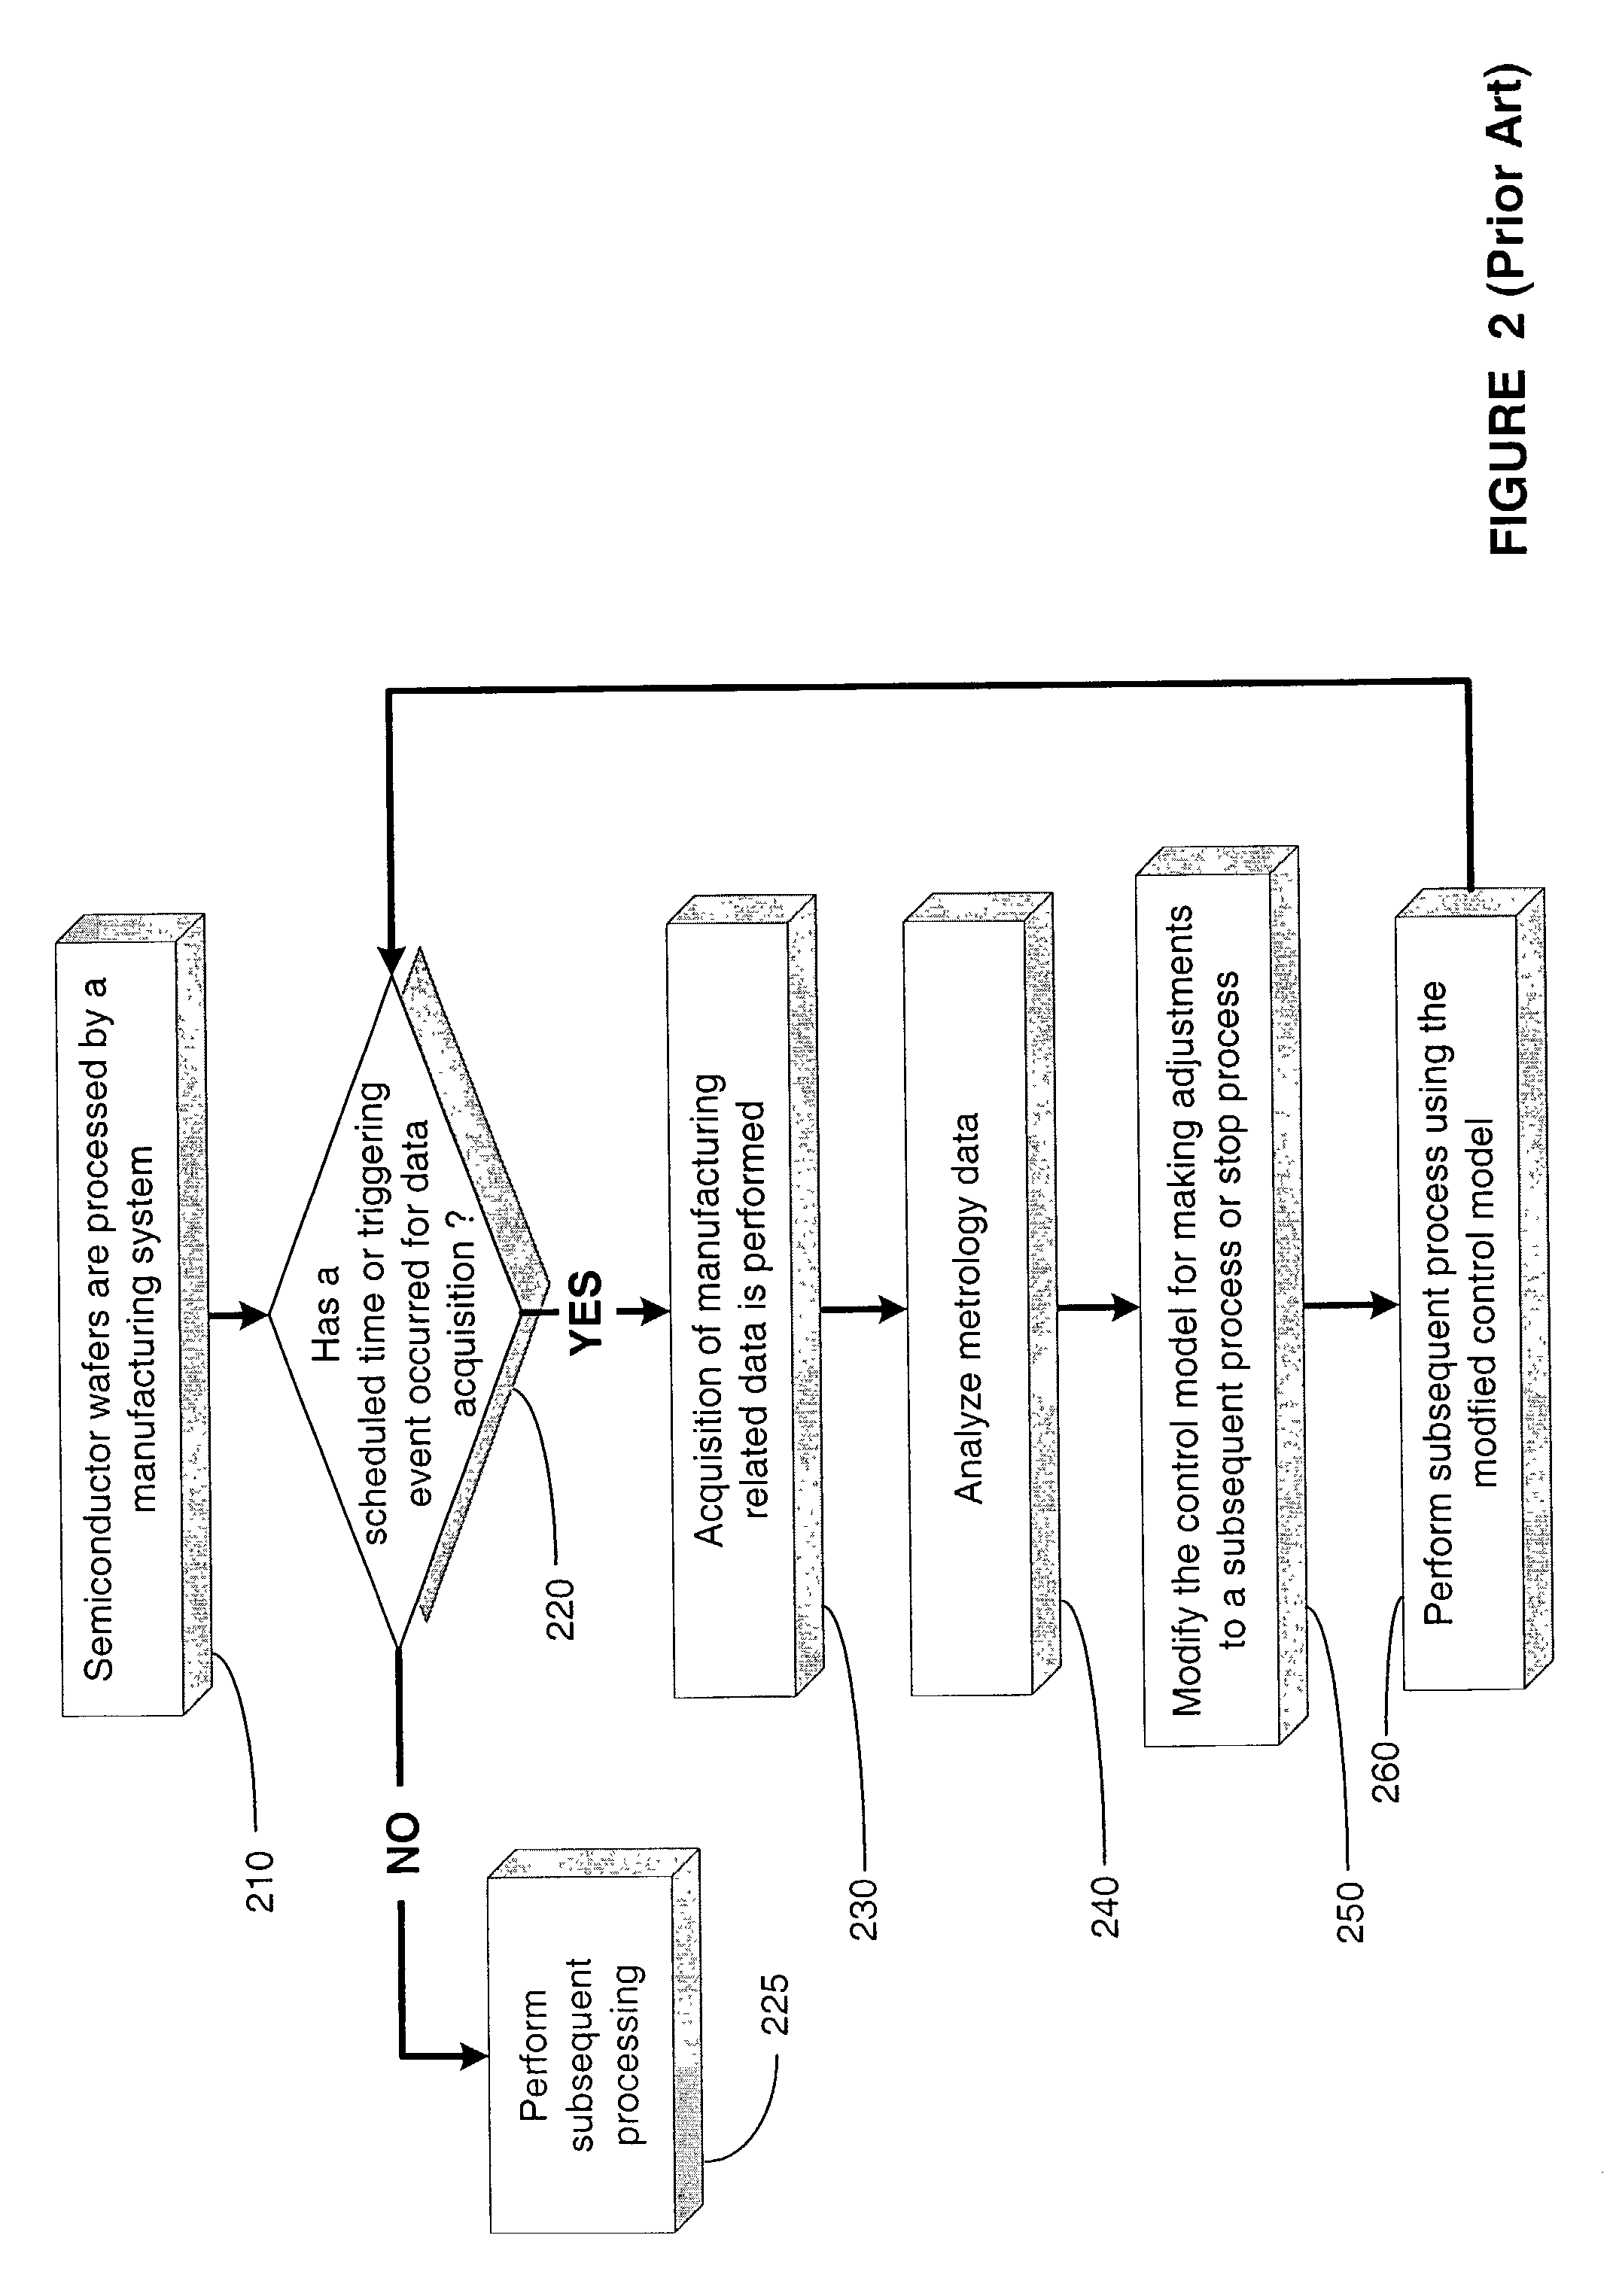 Dynamic targeting for a process control system